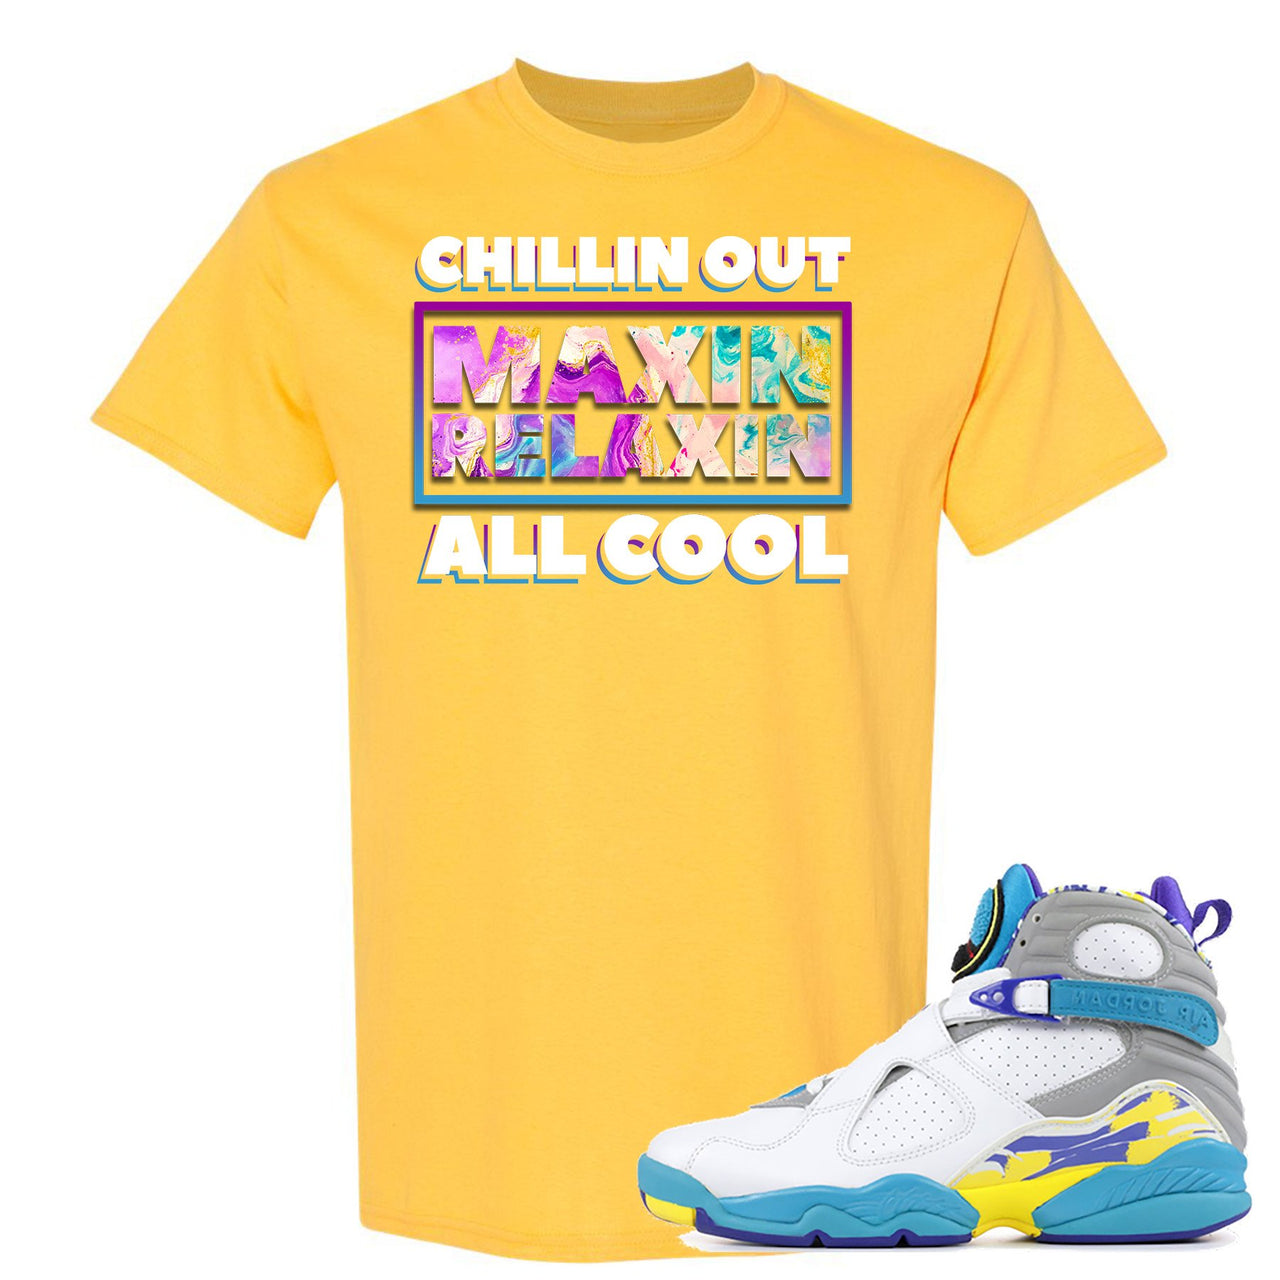 White Aqua 8s T Shirt | Chillin Out Maxin Relaxin All Cool, Daisy